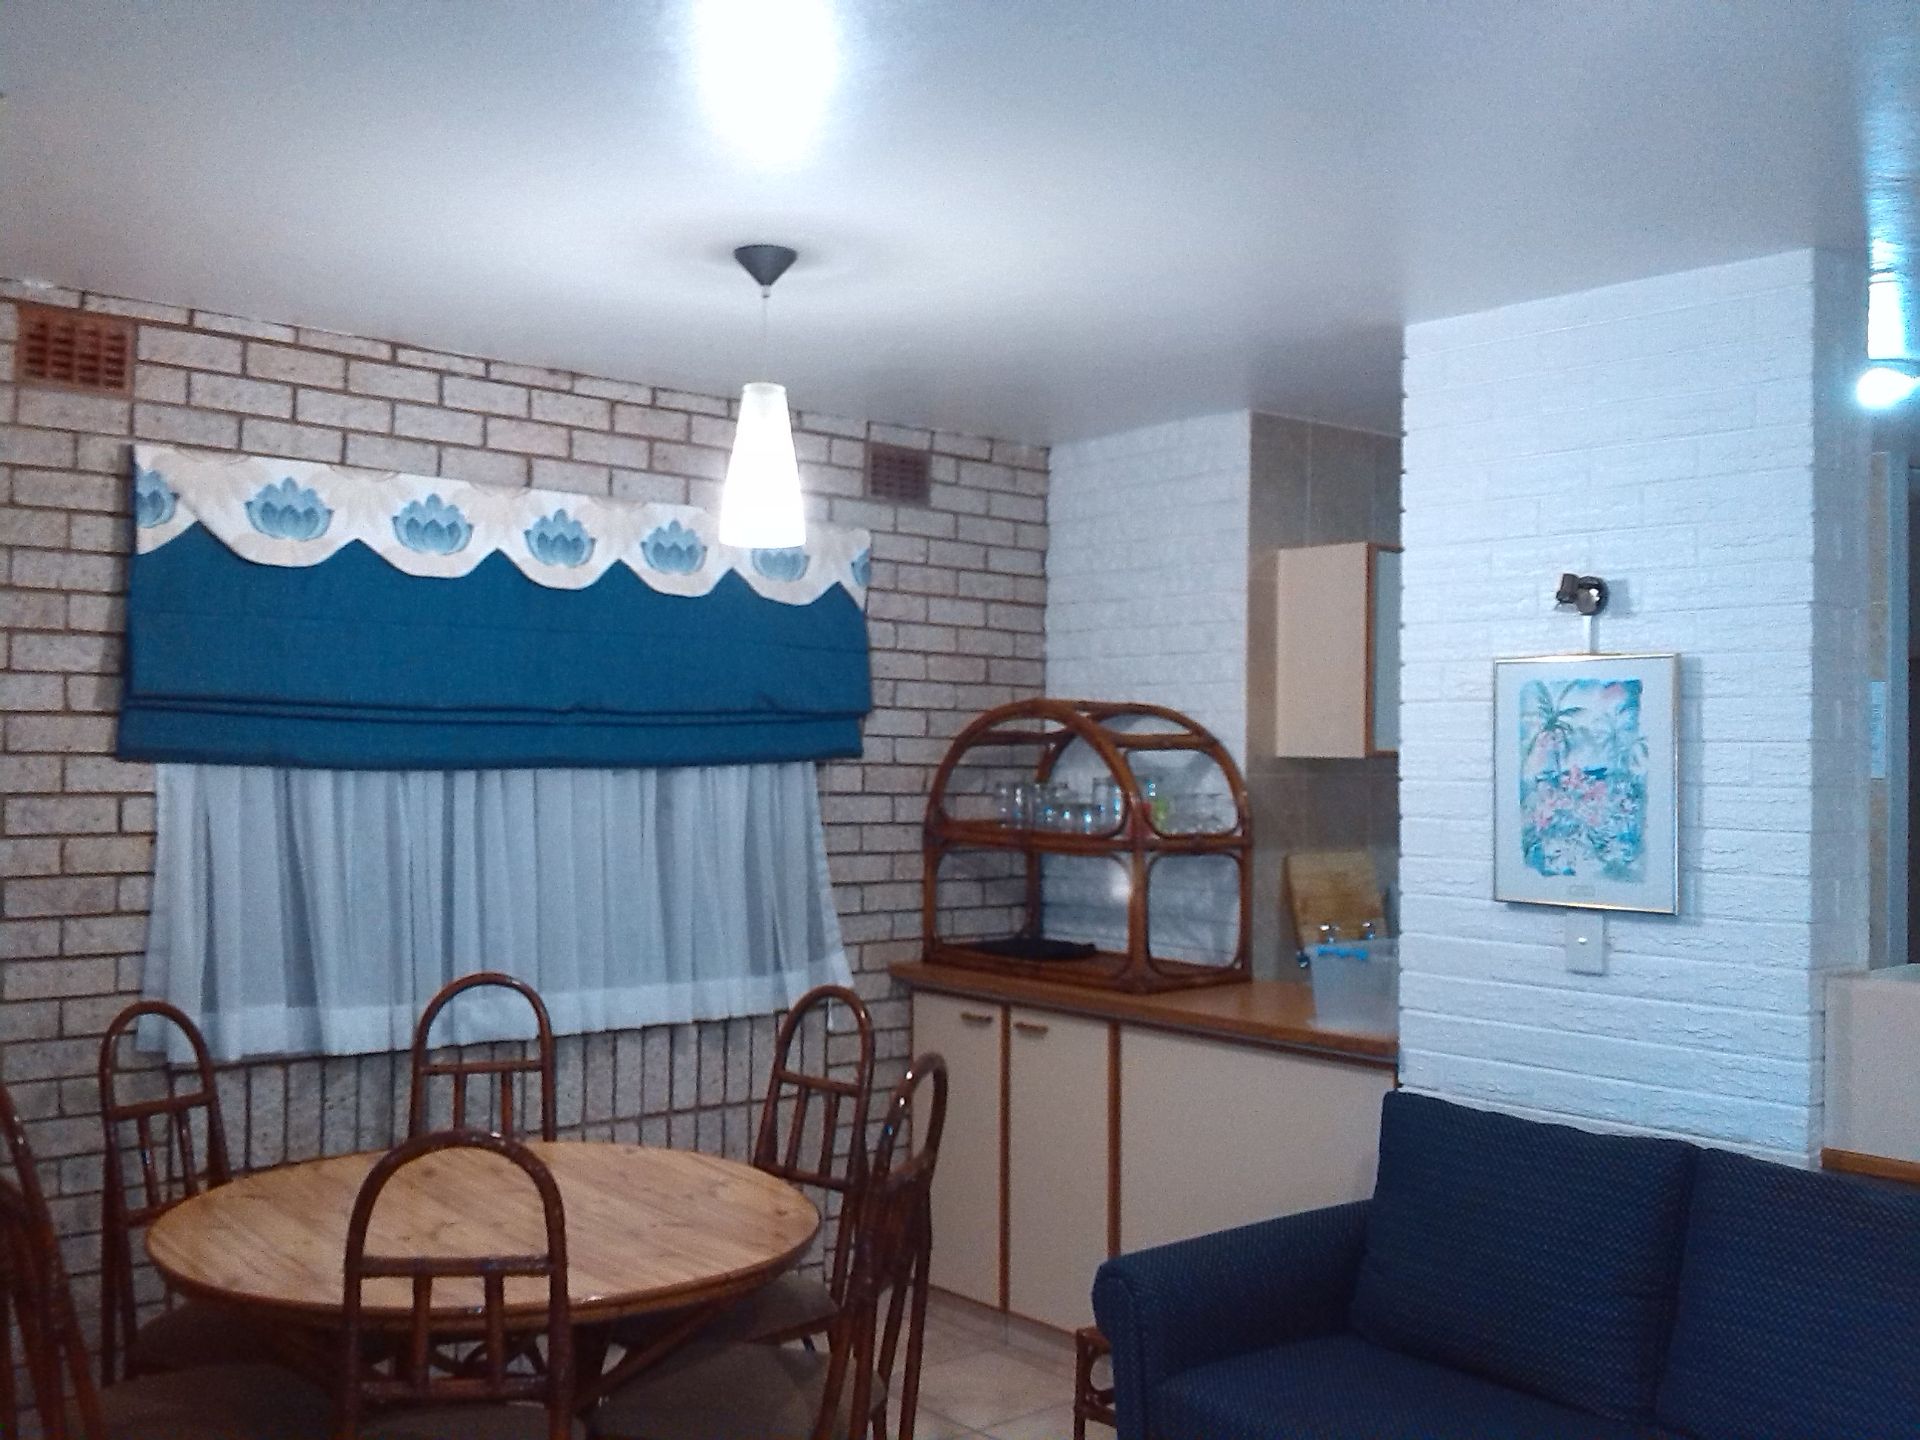 Pearly Shells - 3 Beds (8 Sleepers Max)  . Date - 20/05/2016 - 27/05/2016 - (Shareblock) - Image 15 of 32